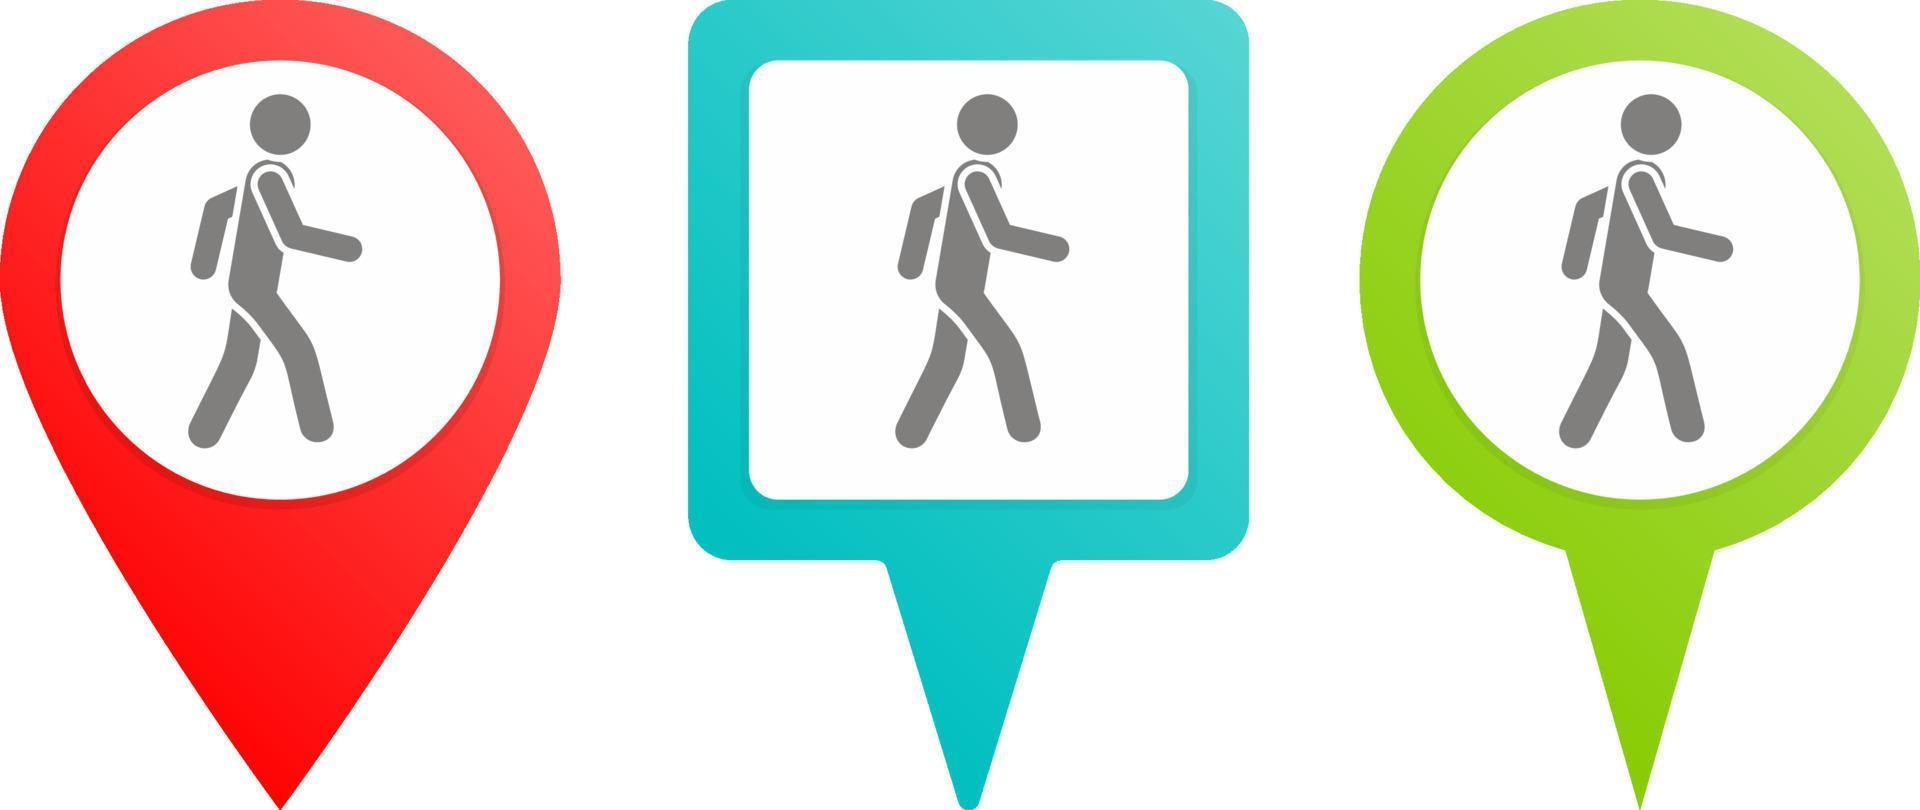 Man, walking pin icon. Multicolor pin vector icon, diferent type map and navigation point.